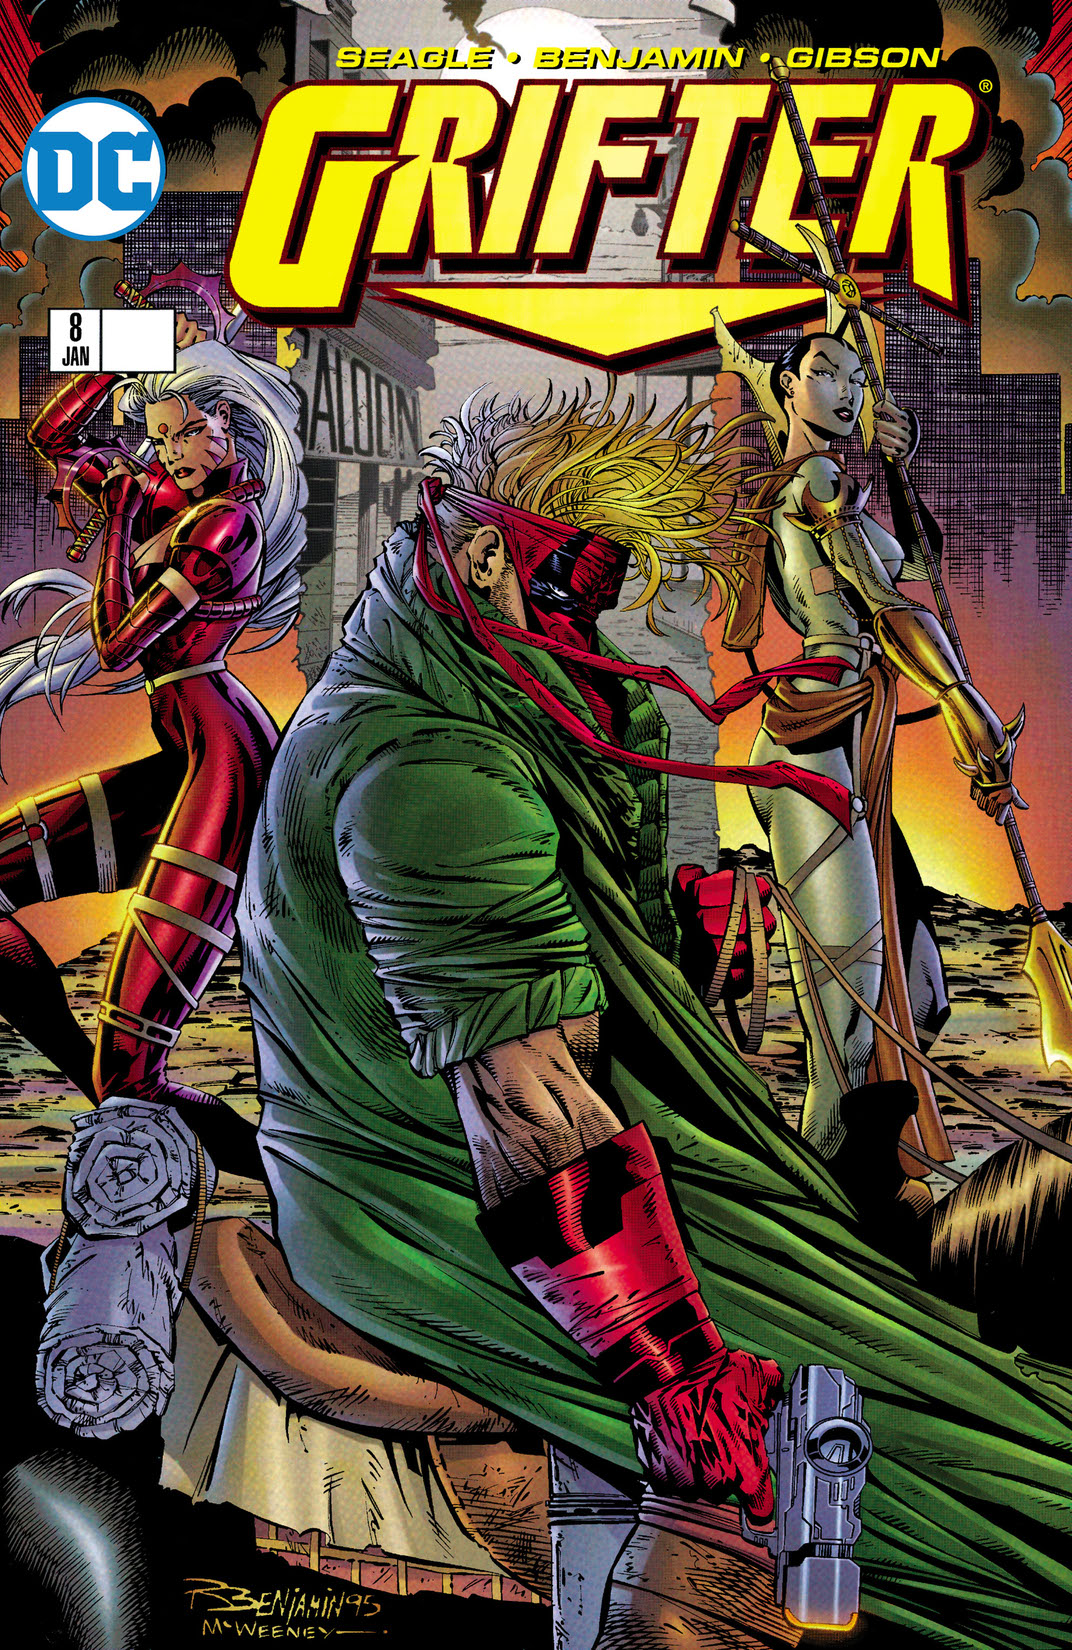 Grifter (1995-1996) #8 preview images